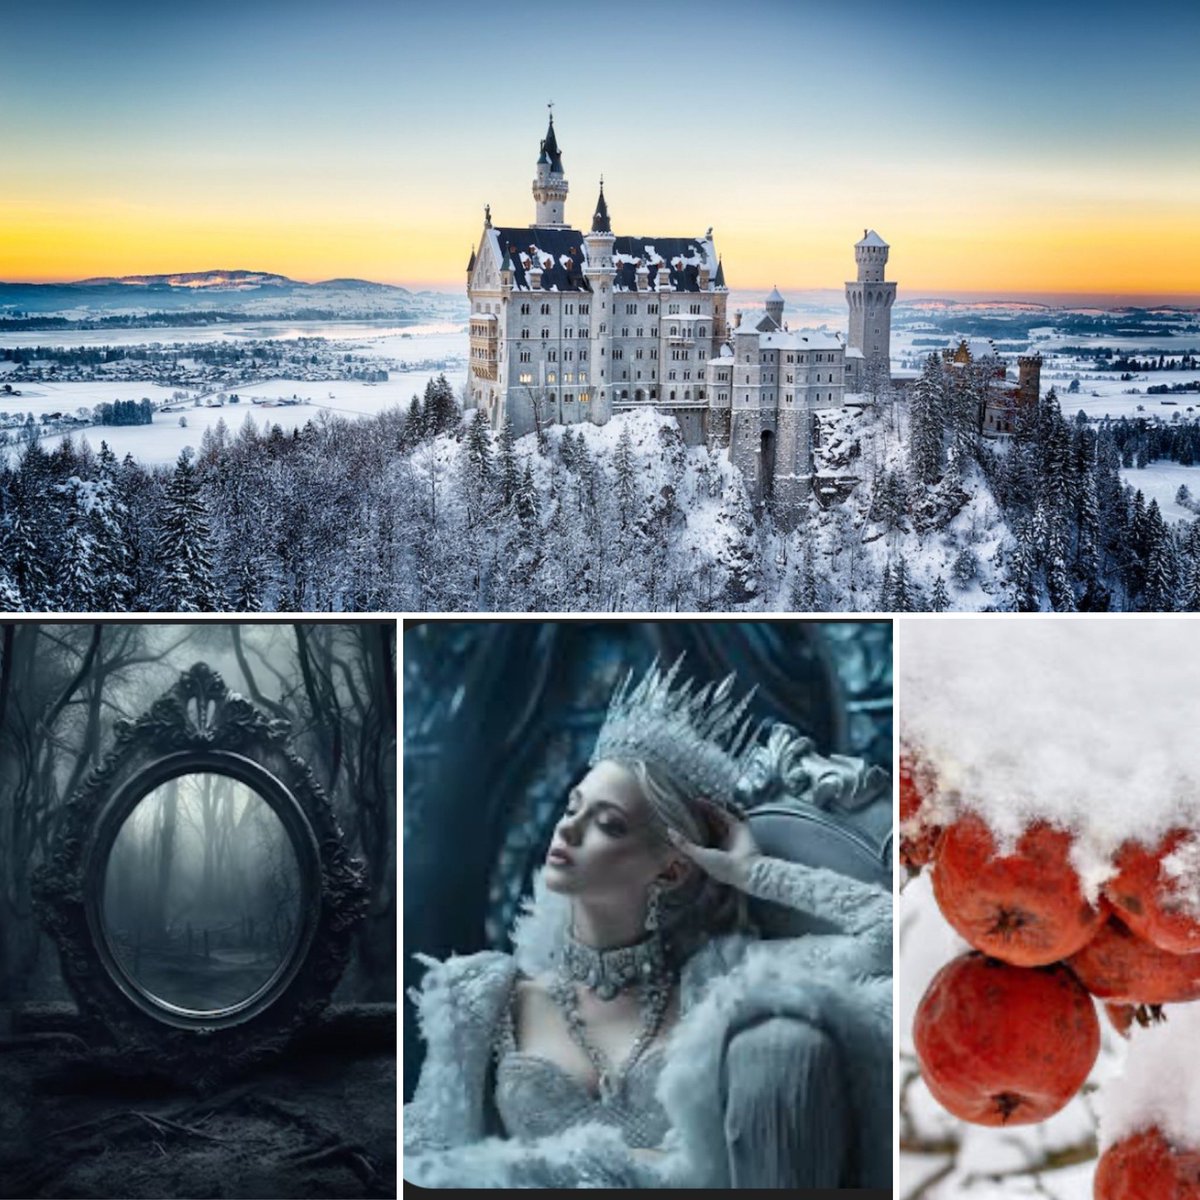 #ShootYourShotSunday When your mother pushes you into a corner, you murder her. Then you dab in some dark magic and become Evil Queen. Snow White retold/the rise (and fall) of Czarina Zarya. #MG #fairytale #originstory